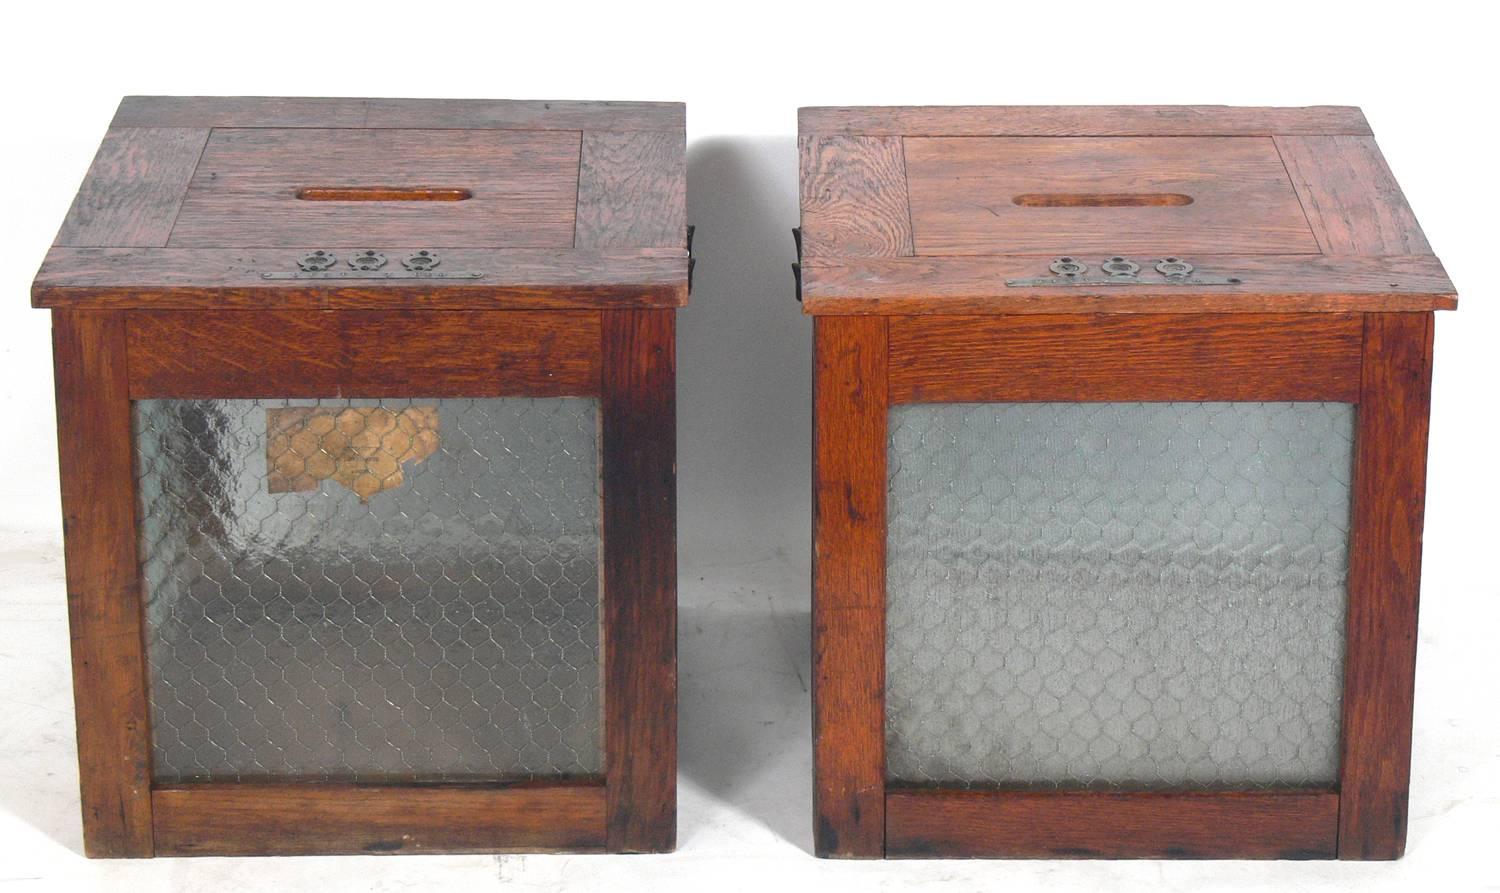 Pair of early 20th century ballot box end tables, American, circa 1920s.
I know we're all tired of talk about the election, but these ballot boxes would be perfect for anyone interested in politics or just great Industrial design. Perfect as end or